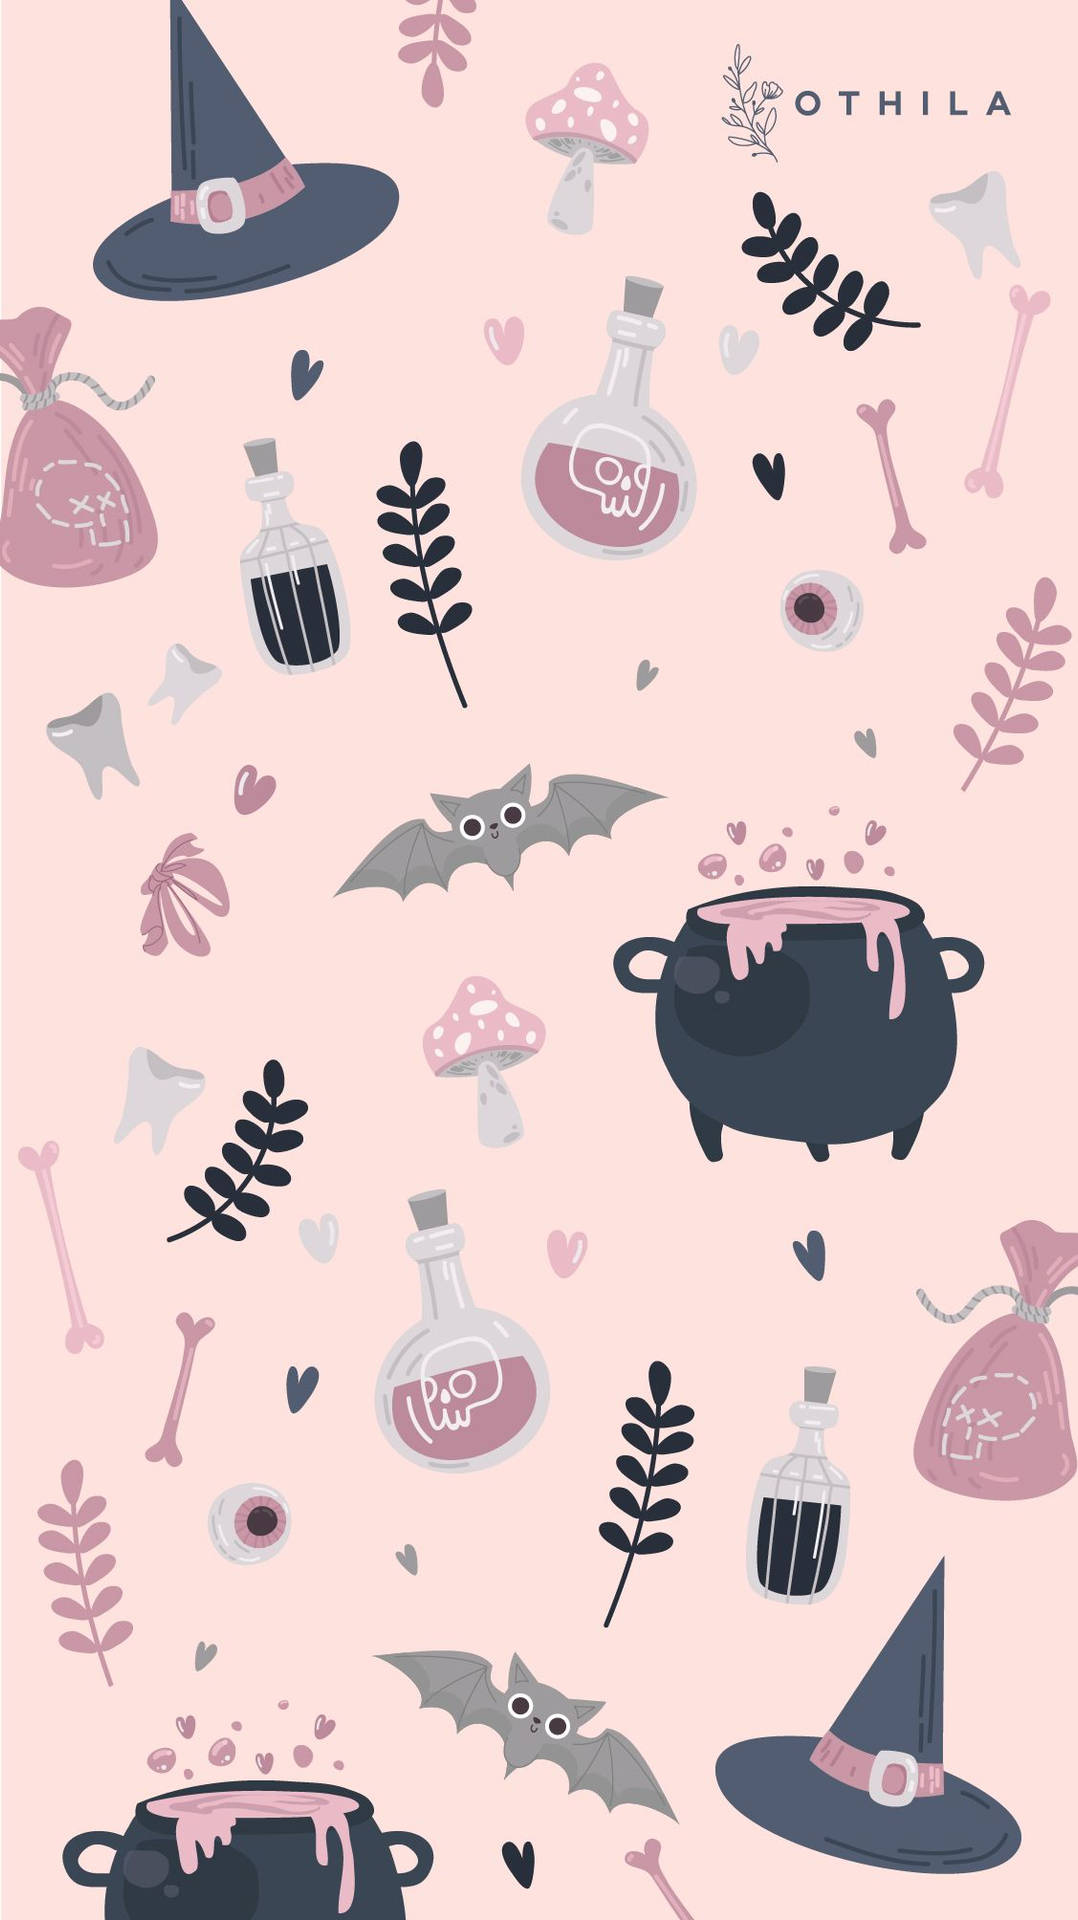 Captivating Pink Witchy Aesthetic Pattern